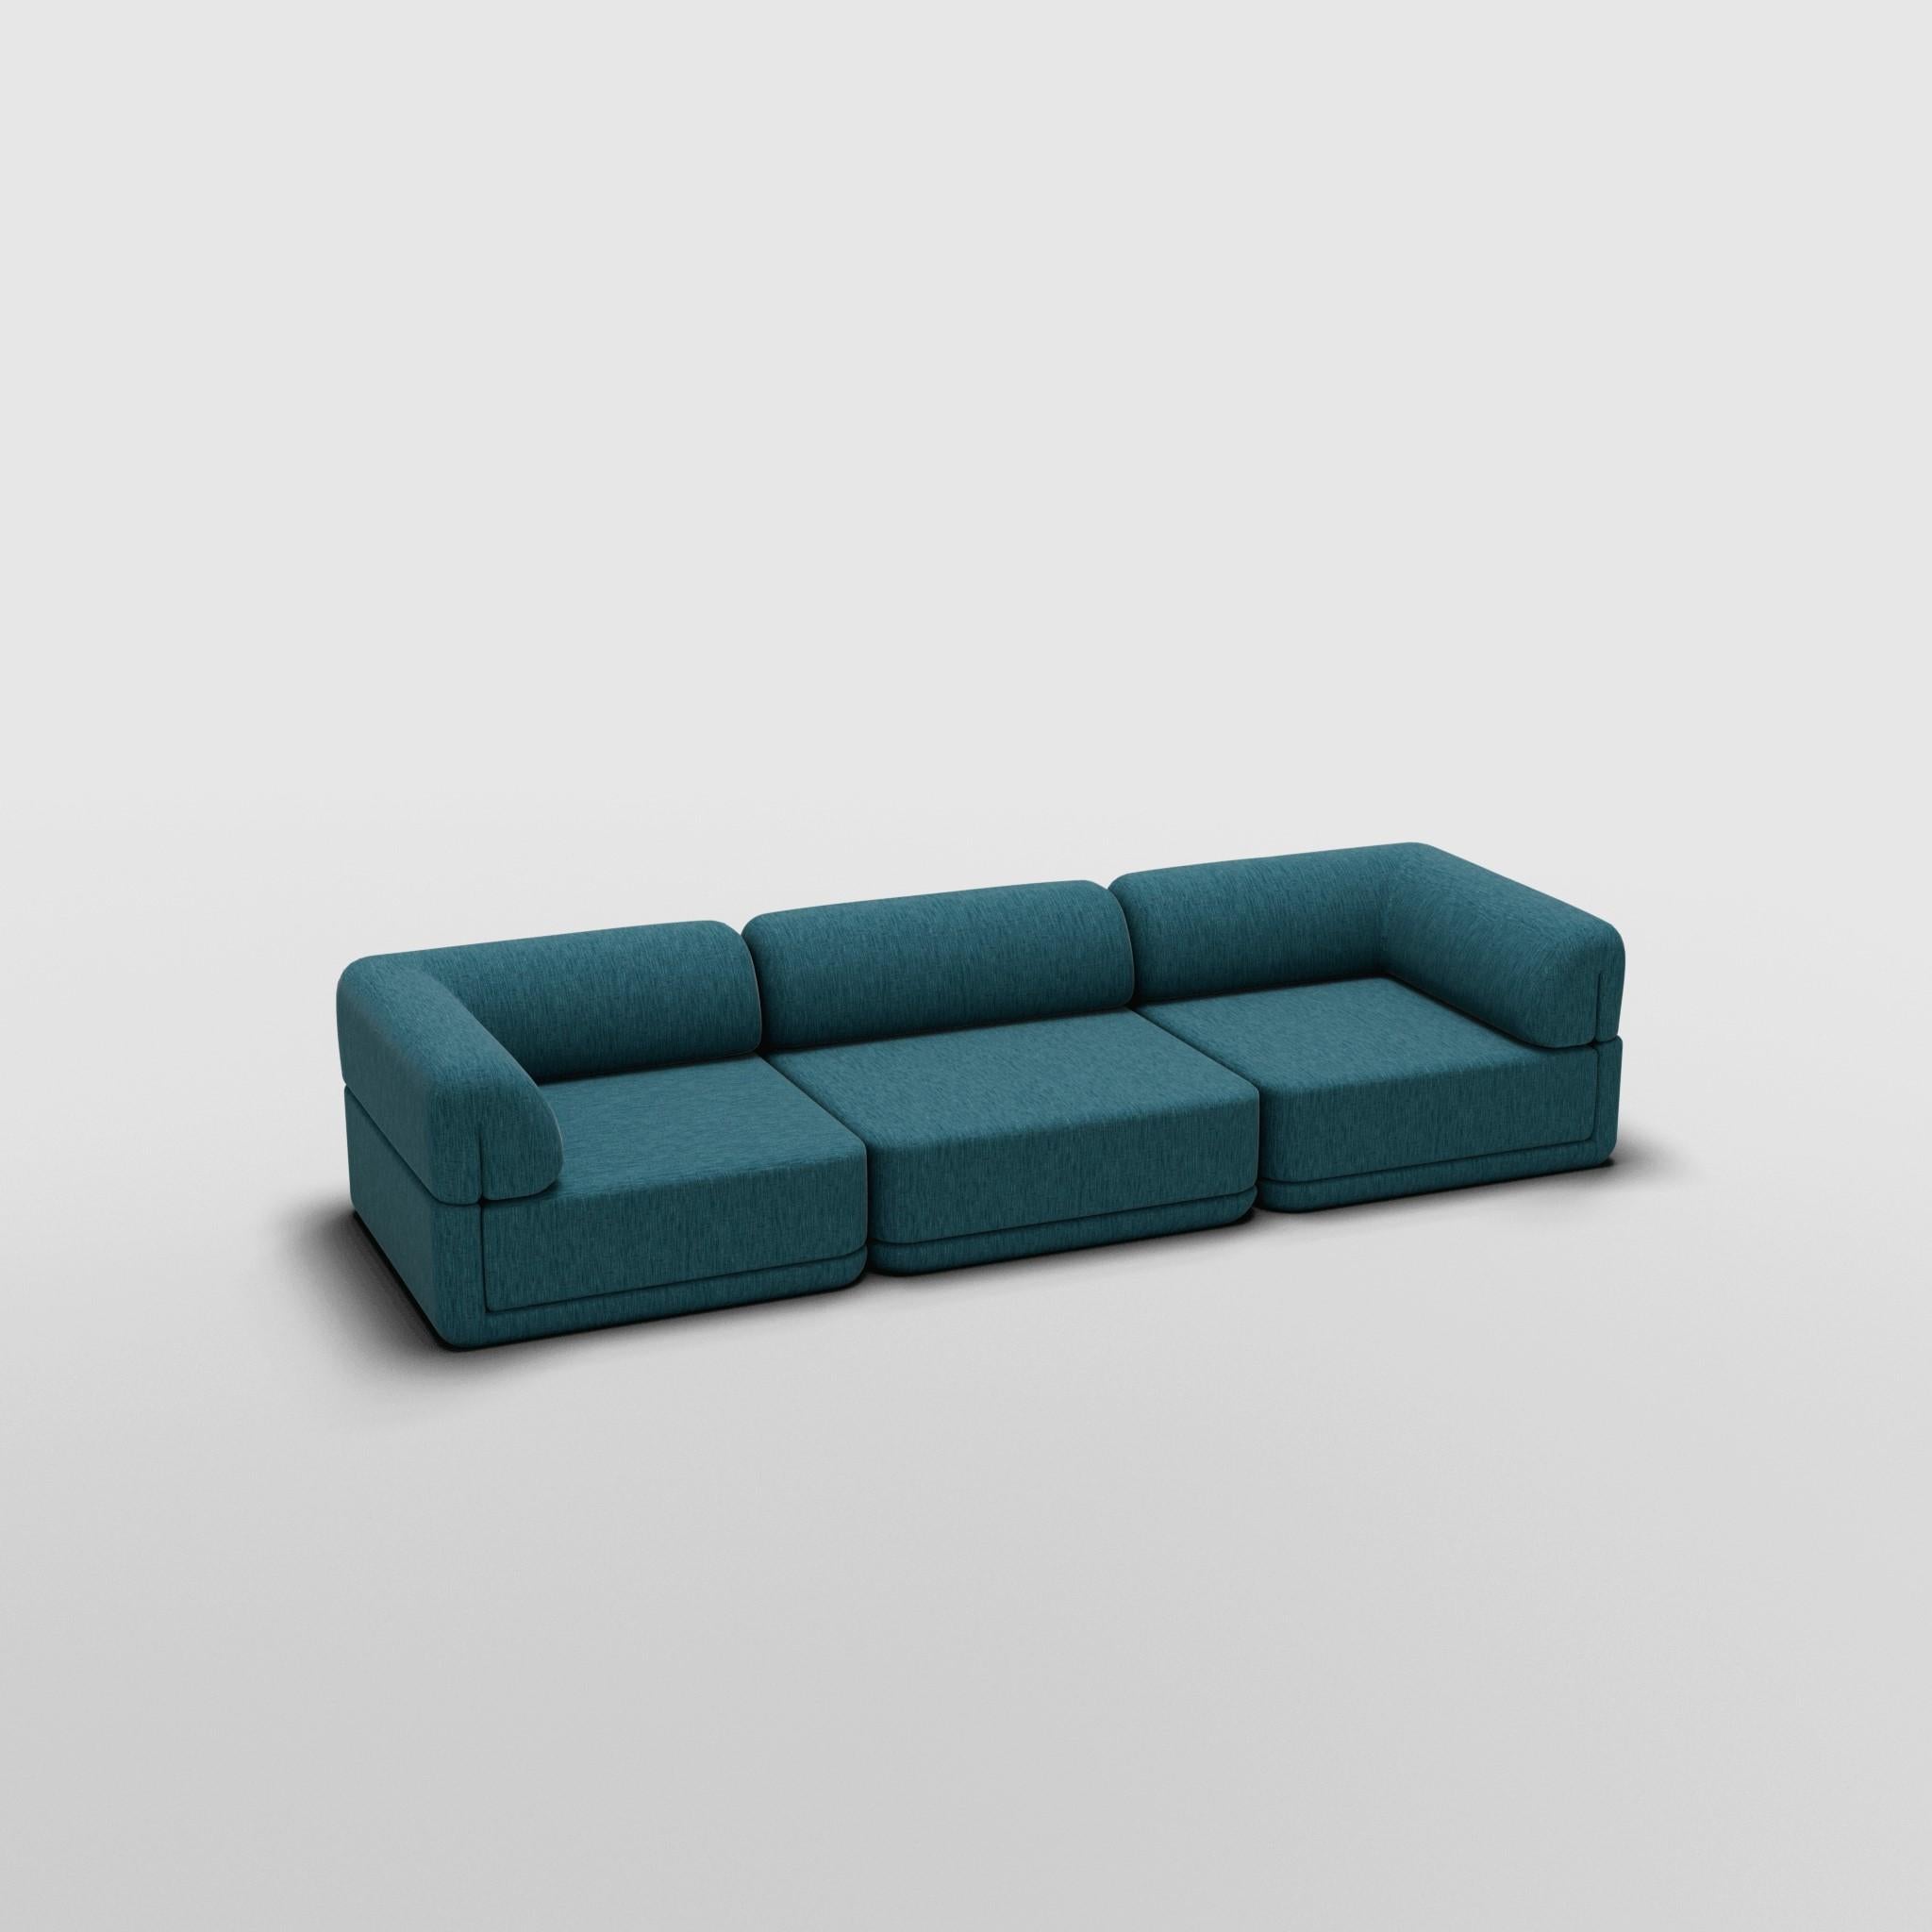 Sofa Lounge Set - Inspired by 70s Italian Luxury Furniture

Discover The Cube Sofa, where art meets adaptability. Its sculptural design and customizable comfort create endless possibilities for your living space. Make a statement, elevate your